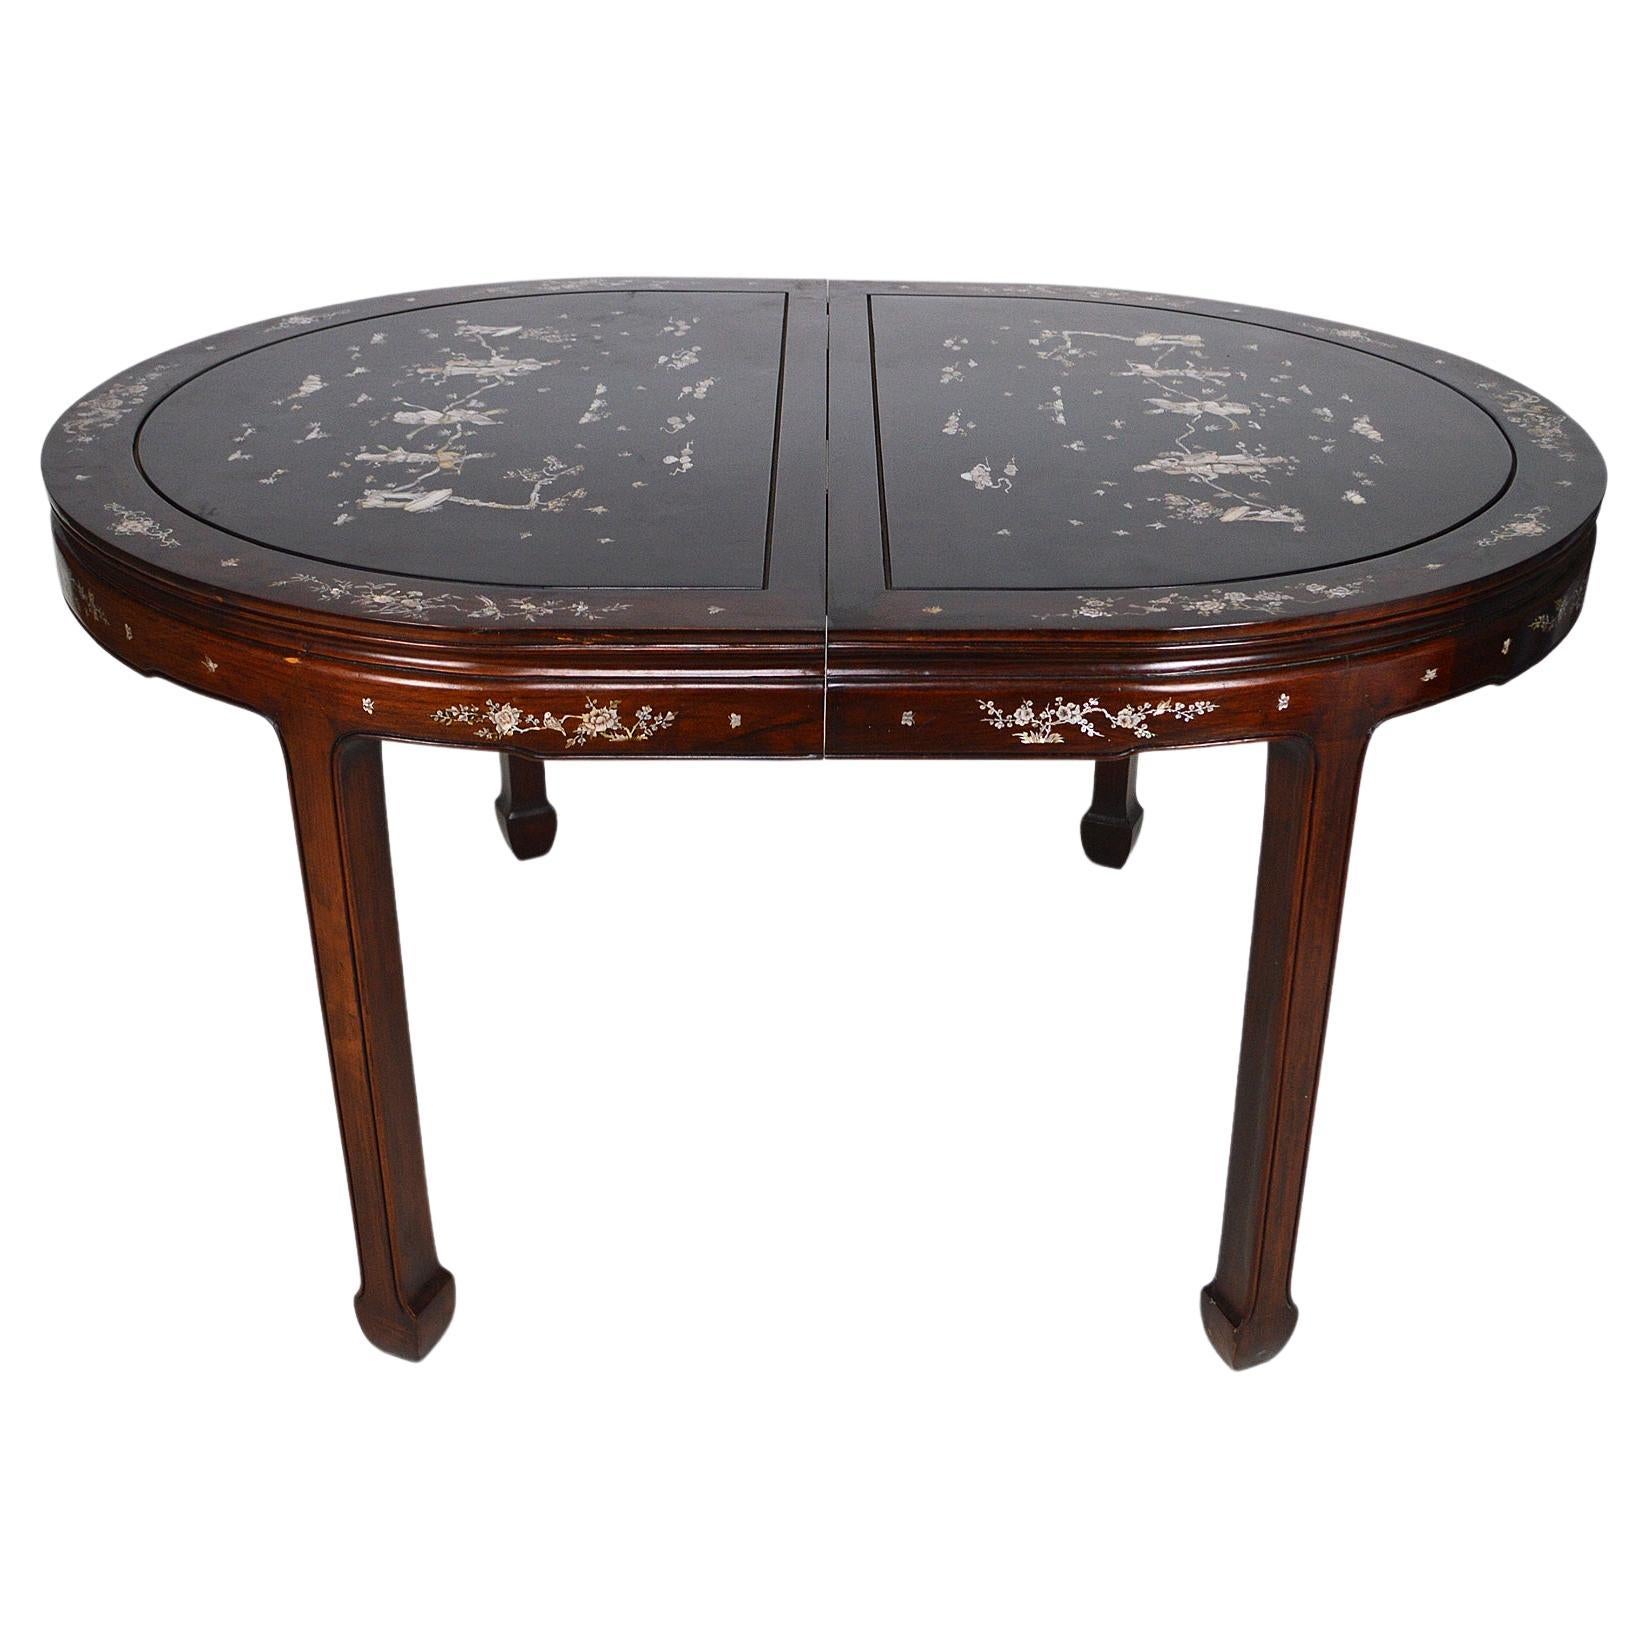 Asian Inlaid Wooden Dining Table with Extensions, Mid-20th Century